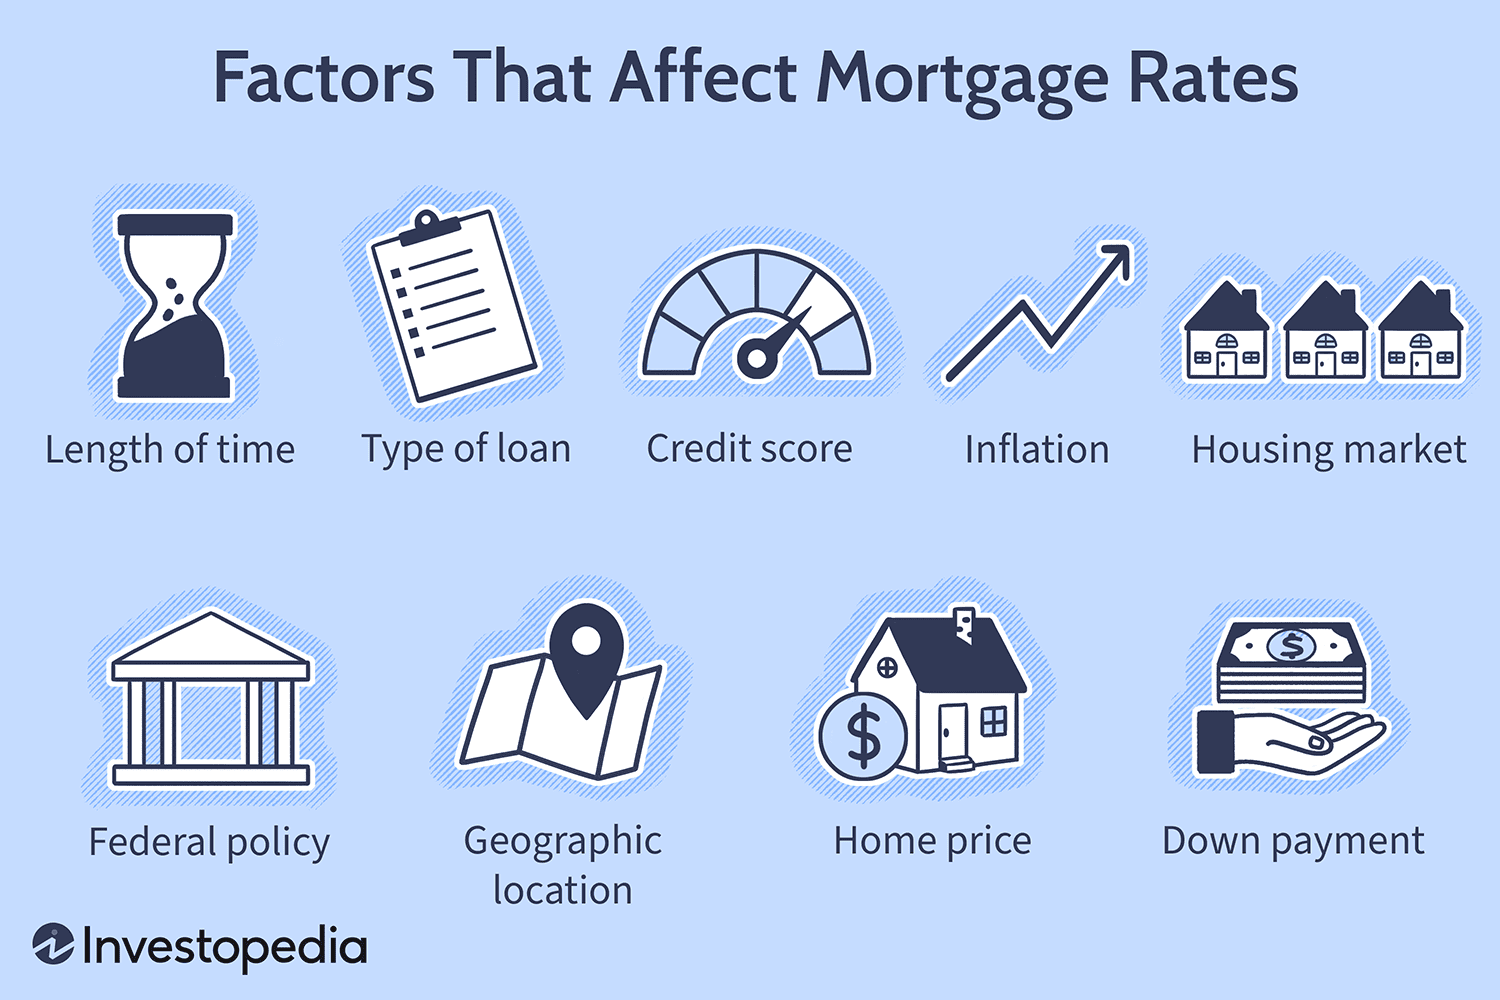 How Are Mortgage Interest Rates Determined? (Credit Score, Loan Type, Economic Factors)